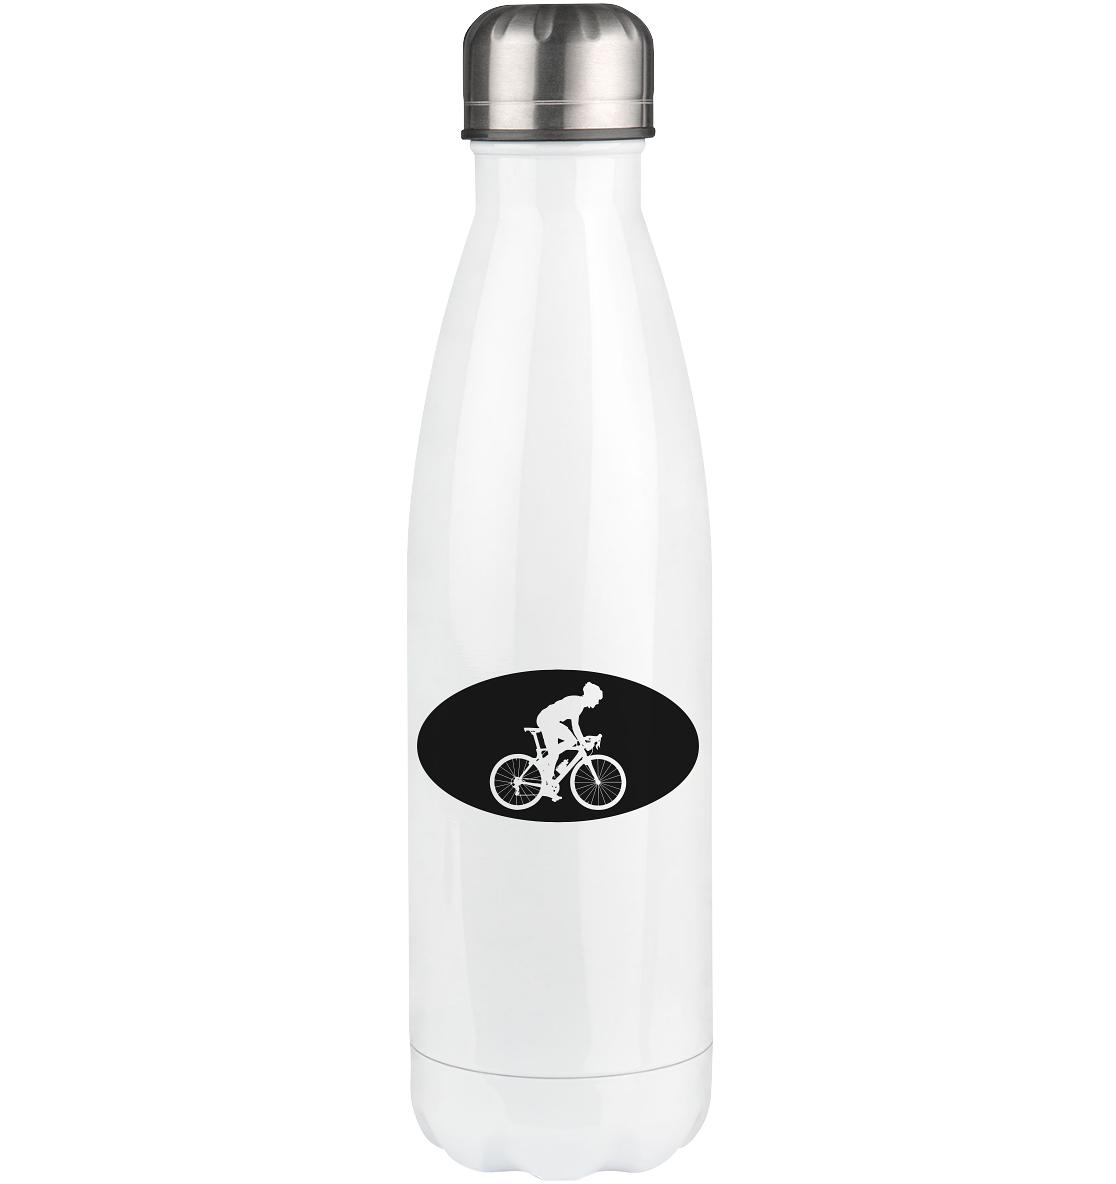 Semicircle and Cycling - Edelstahl Thermosflasche fahrrad 500ml